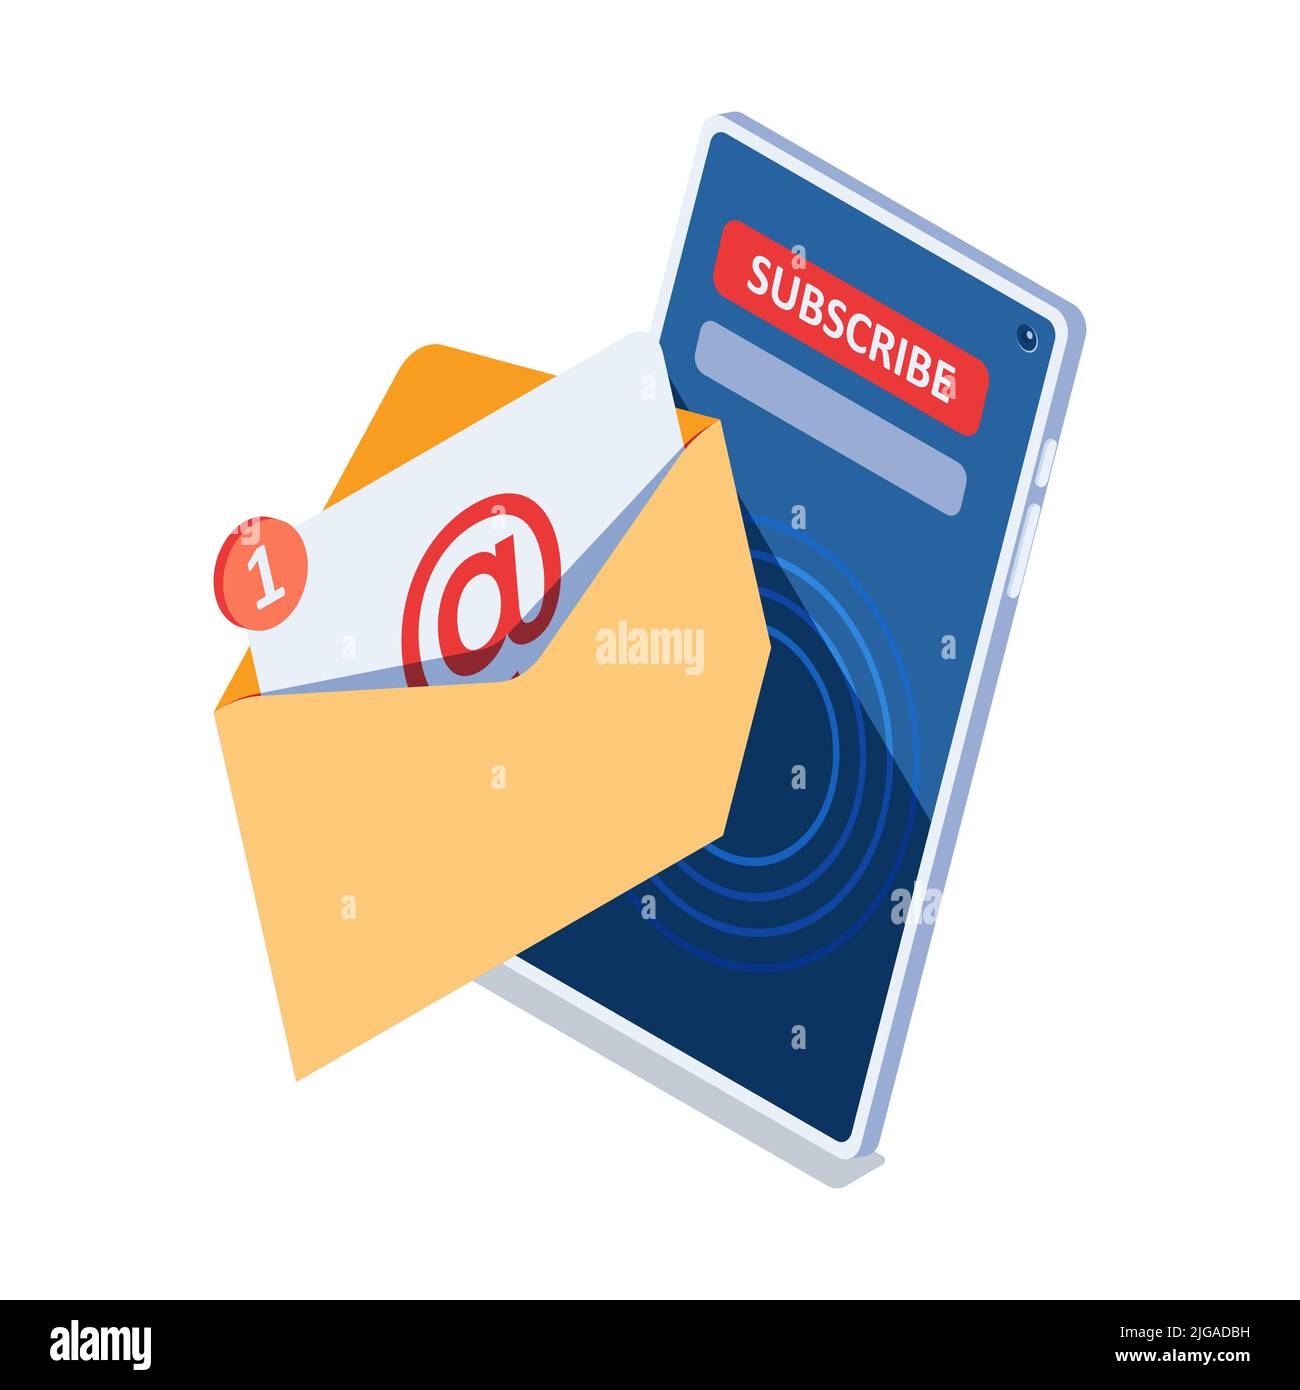 Flat 3d Isometric Email Notification with Subscribe Button on Smarthpone Screen. Newsletter subscription and Email Marketing Concept. Stock Vector